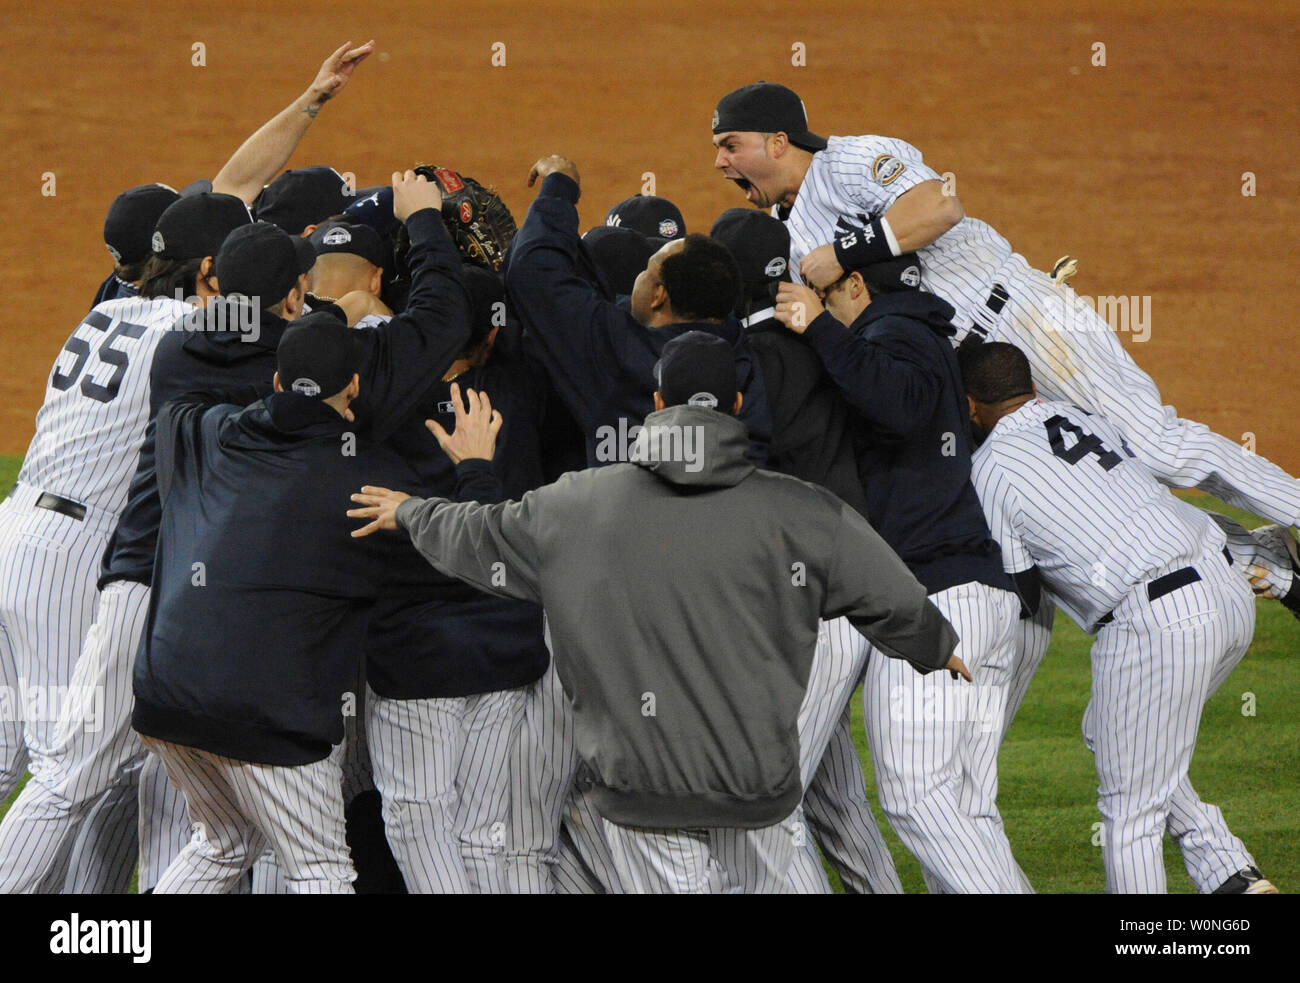 World Series champion NY Yankees beat Phillies, 7-3, in Game 6 